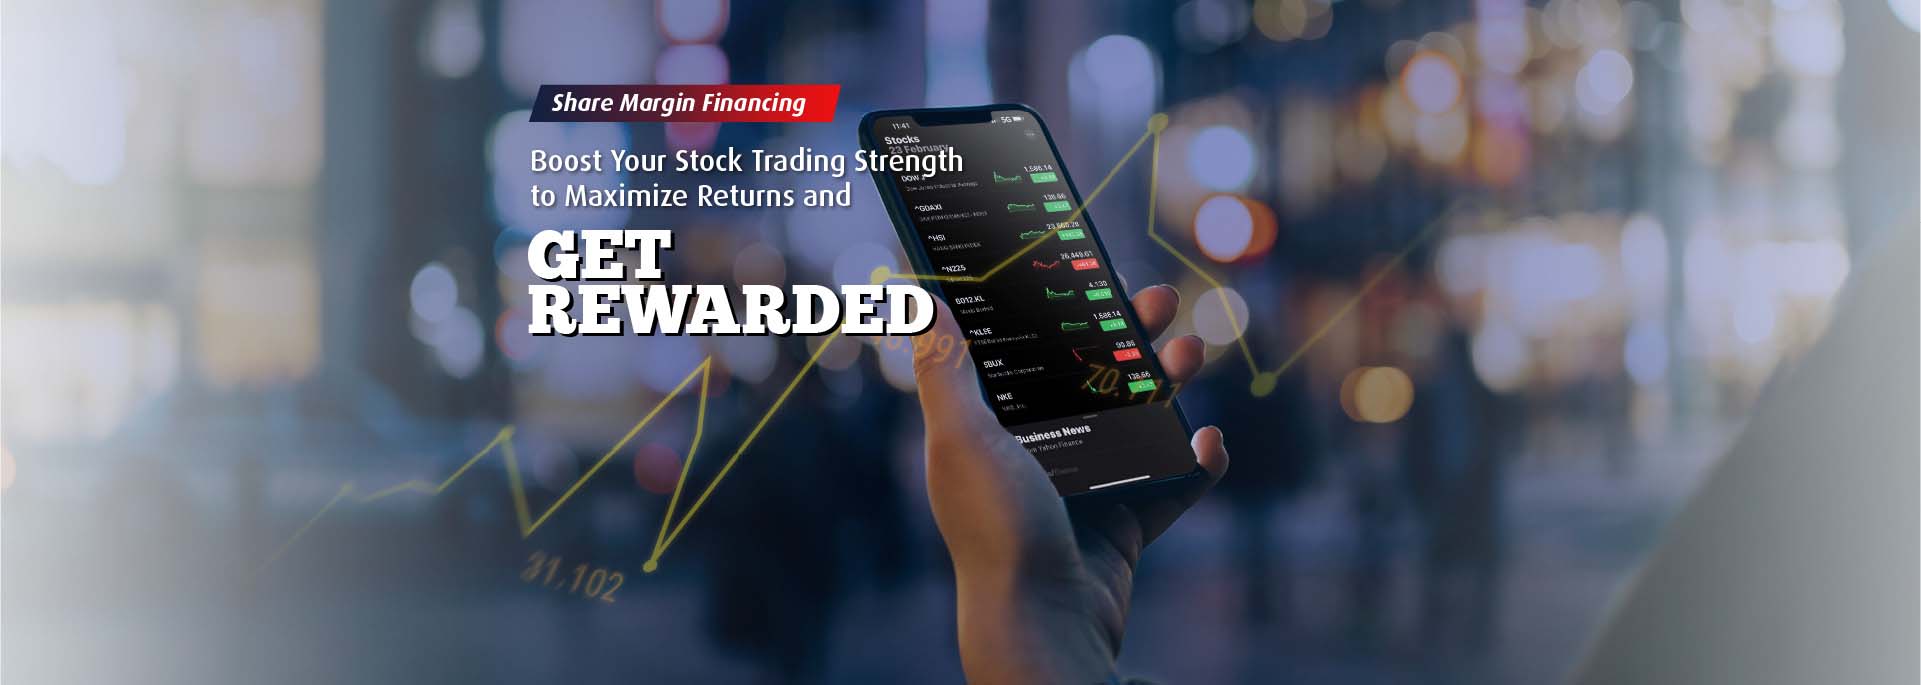 Boost your stock trading strength to maximize returns and get rewarded